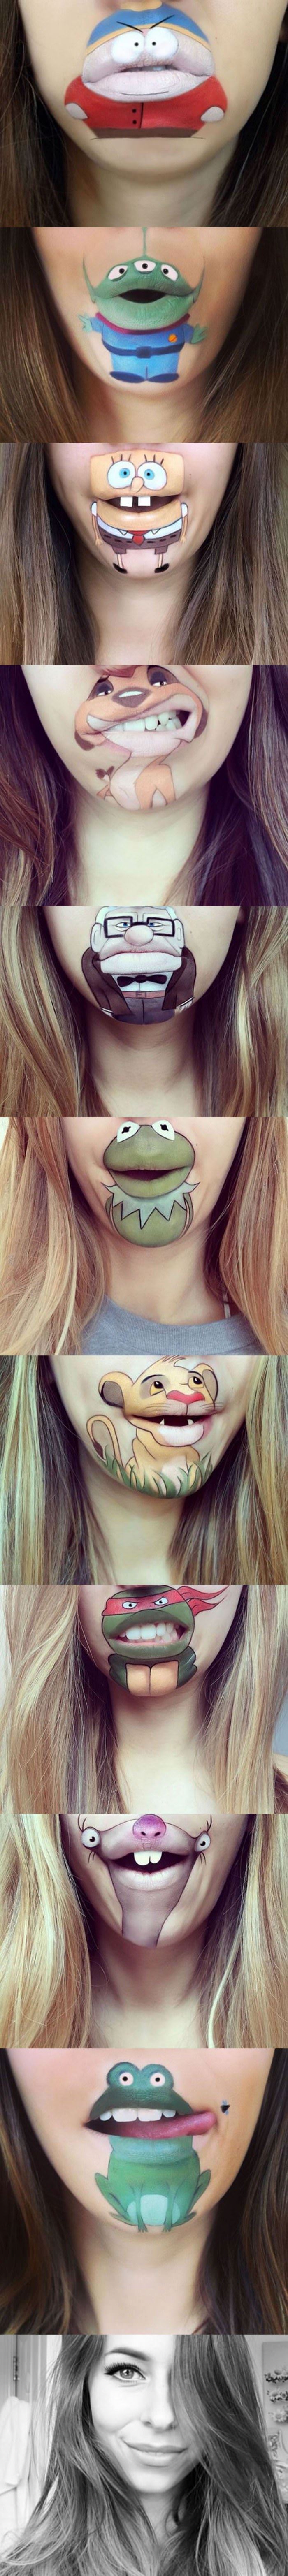 cool face makeup funny picture